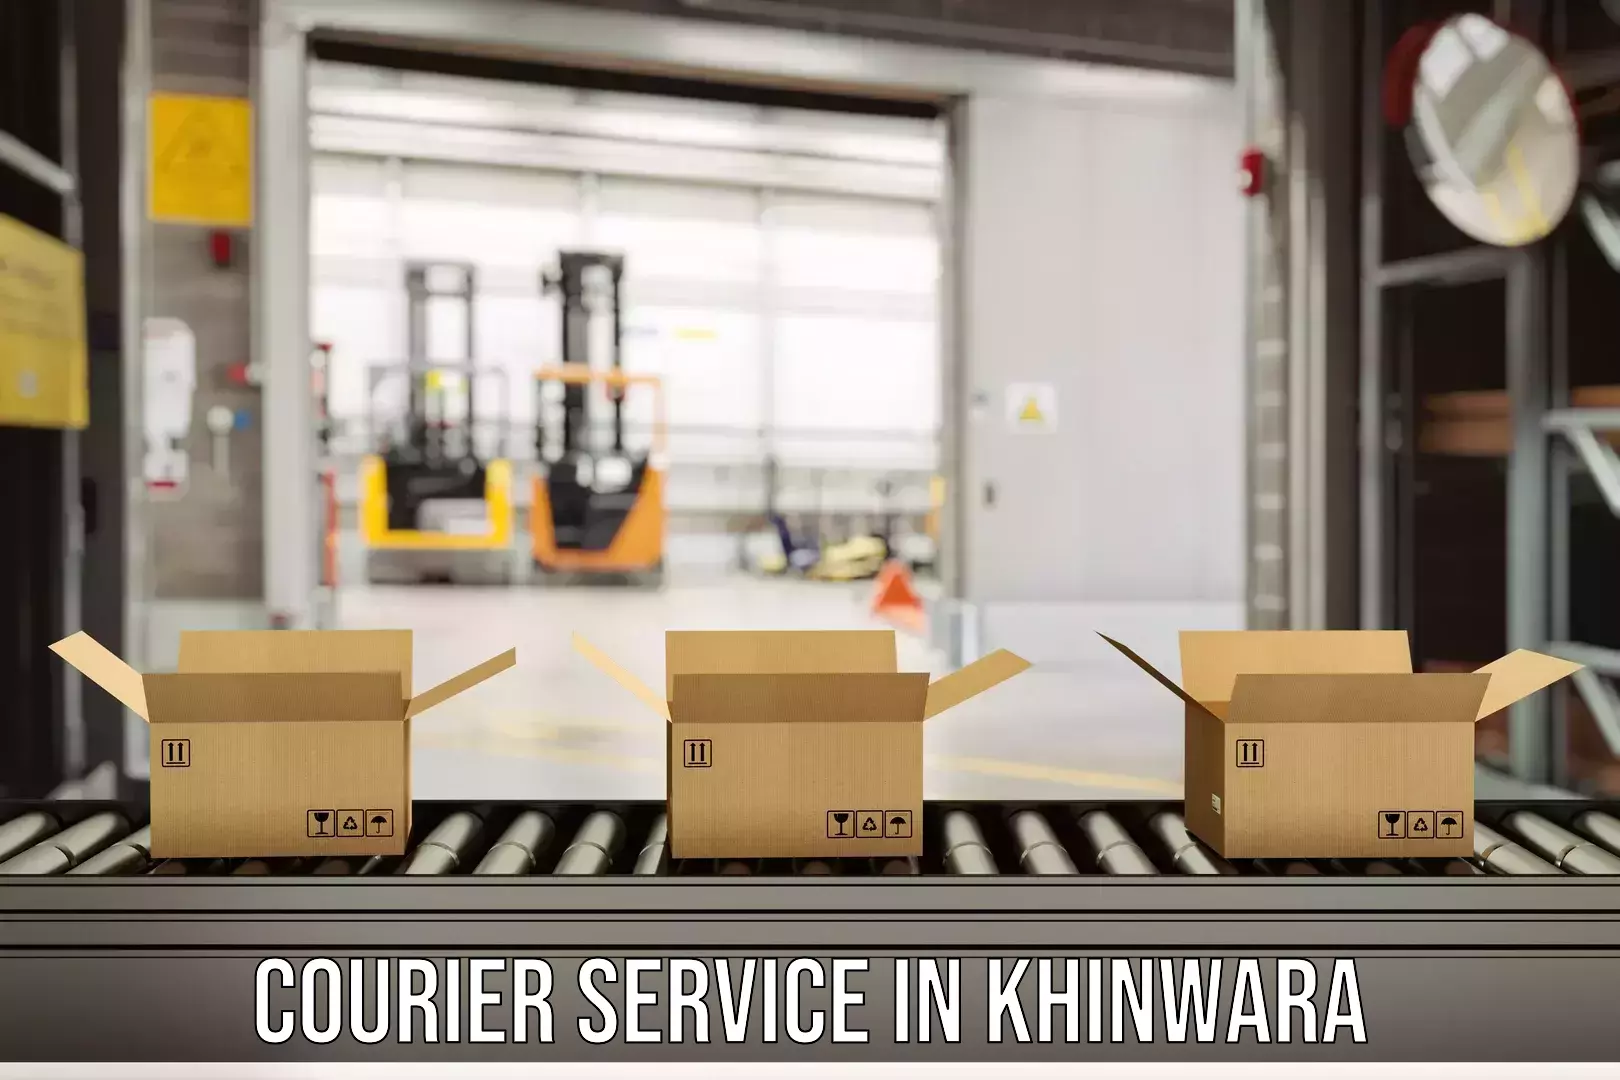 Same-day delivery options in Khinwara